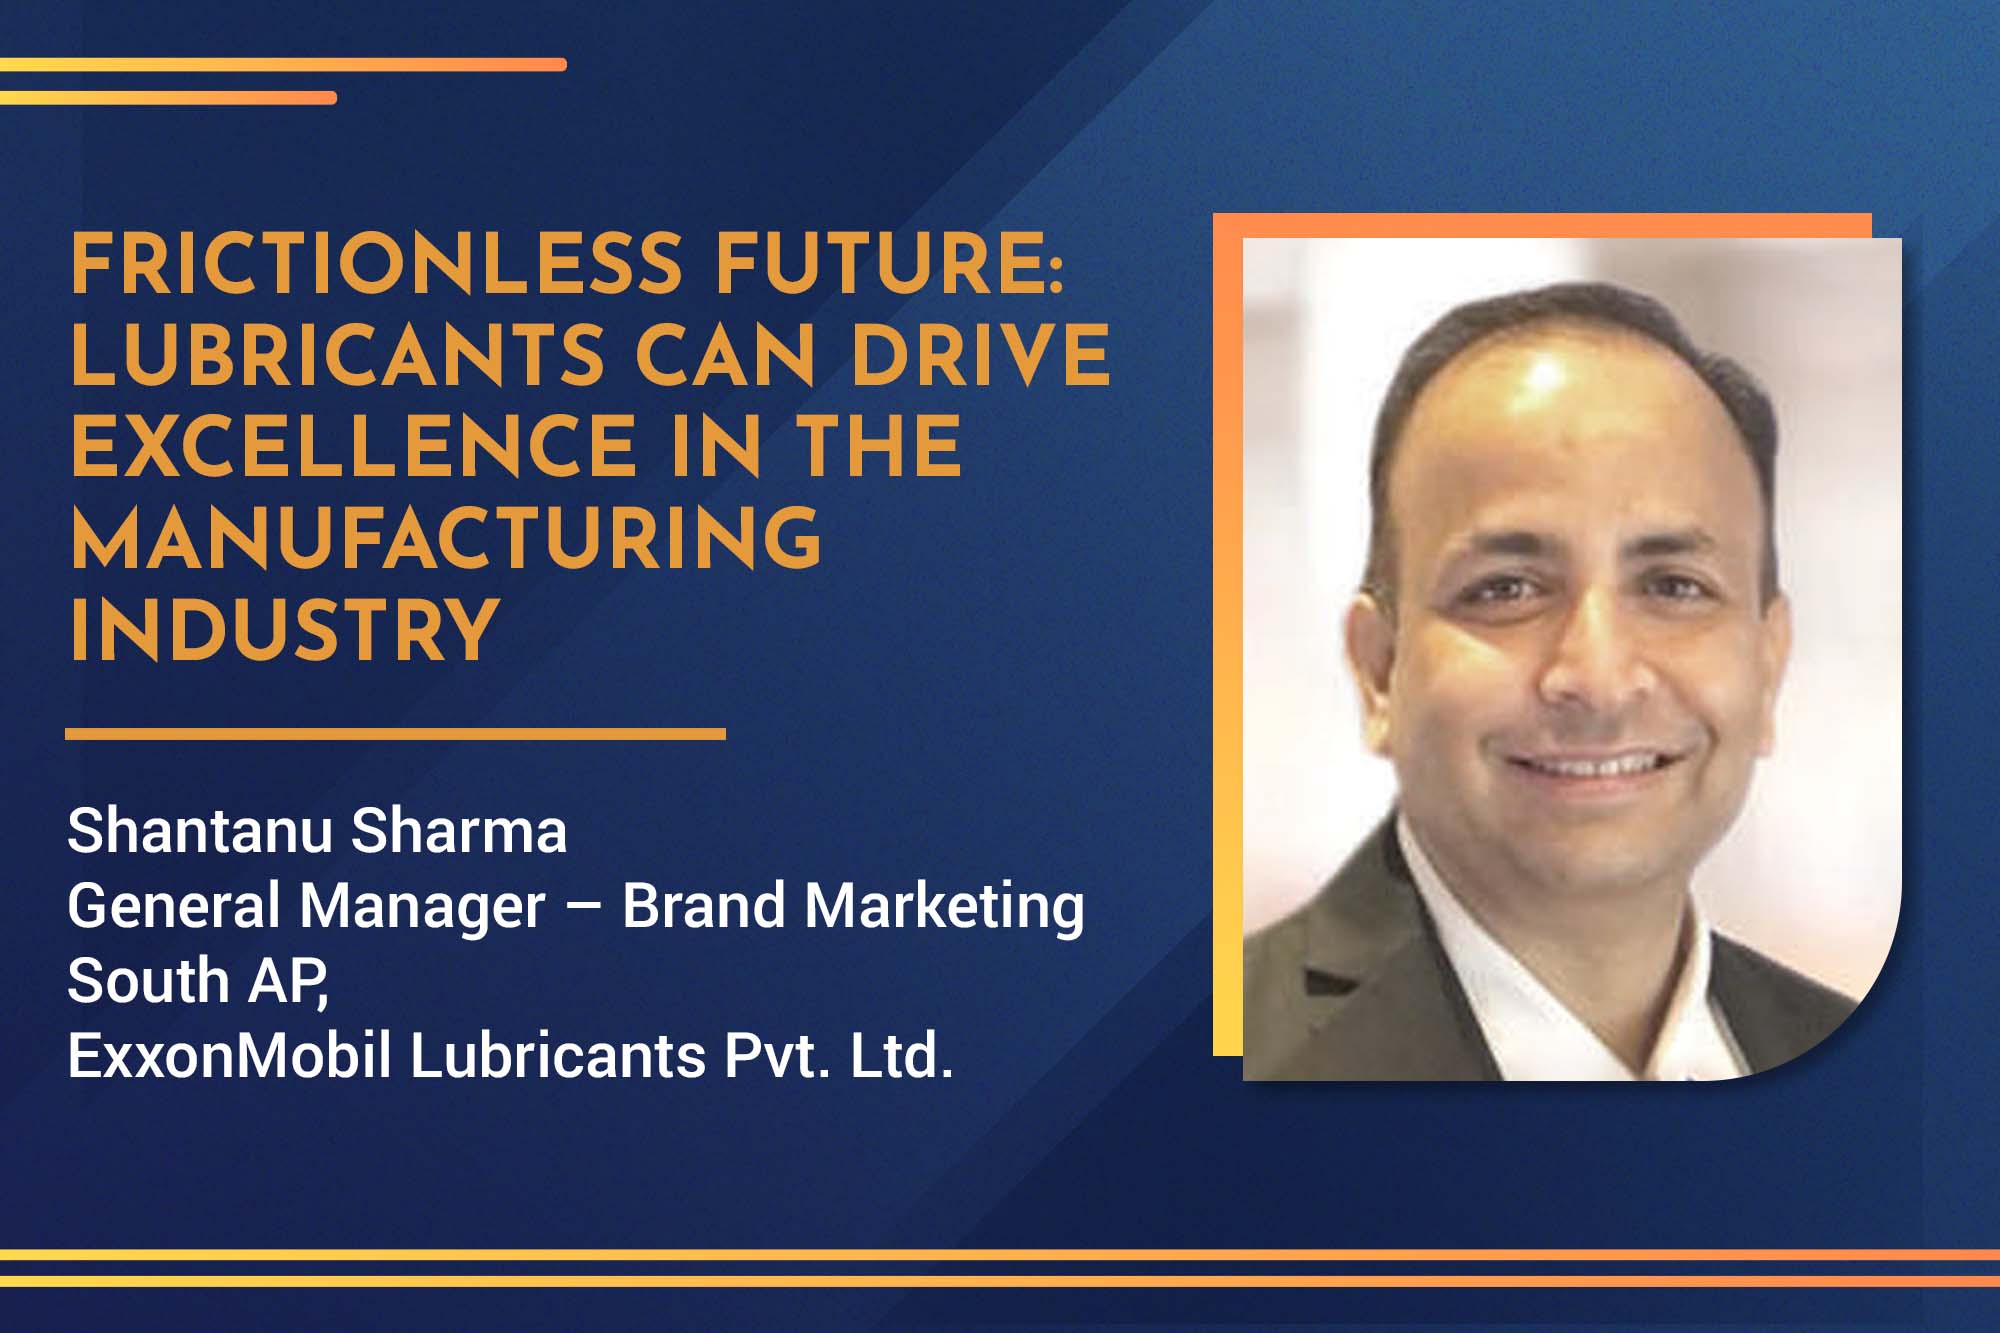 Frictionless Future: Lubricants can drive excellence in the manufacturing industry